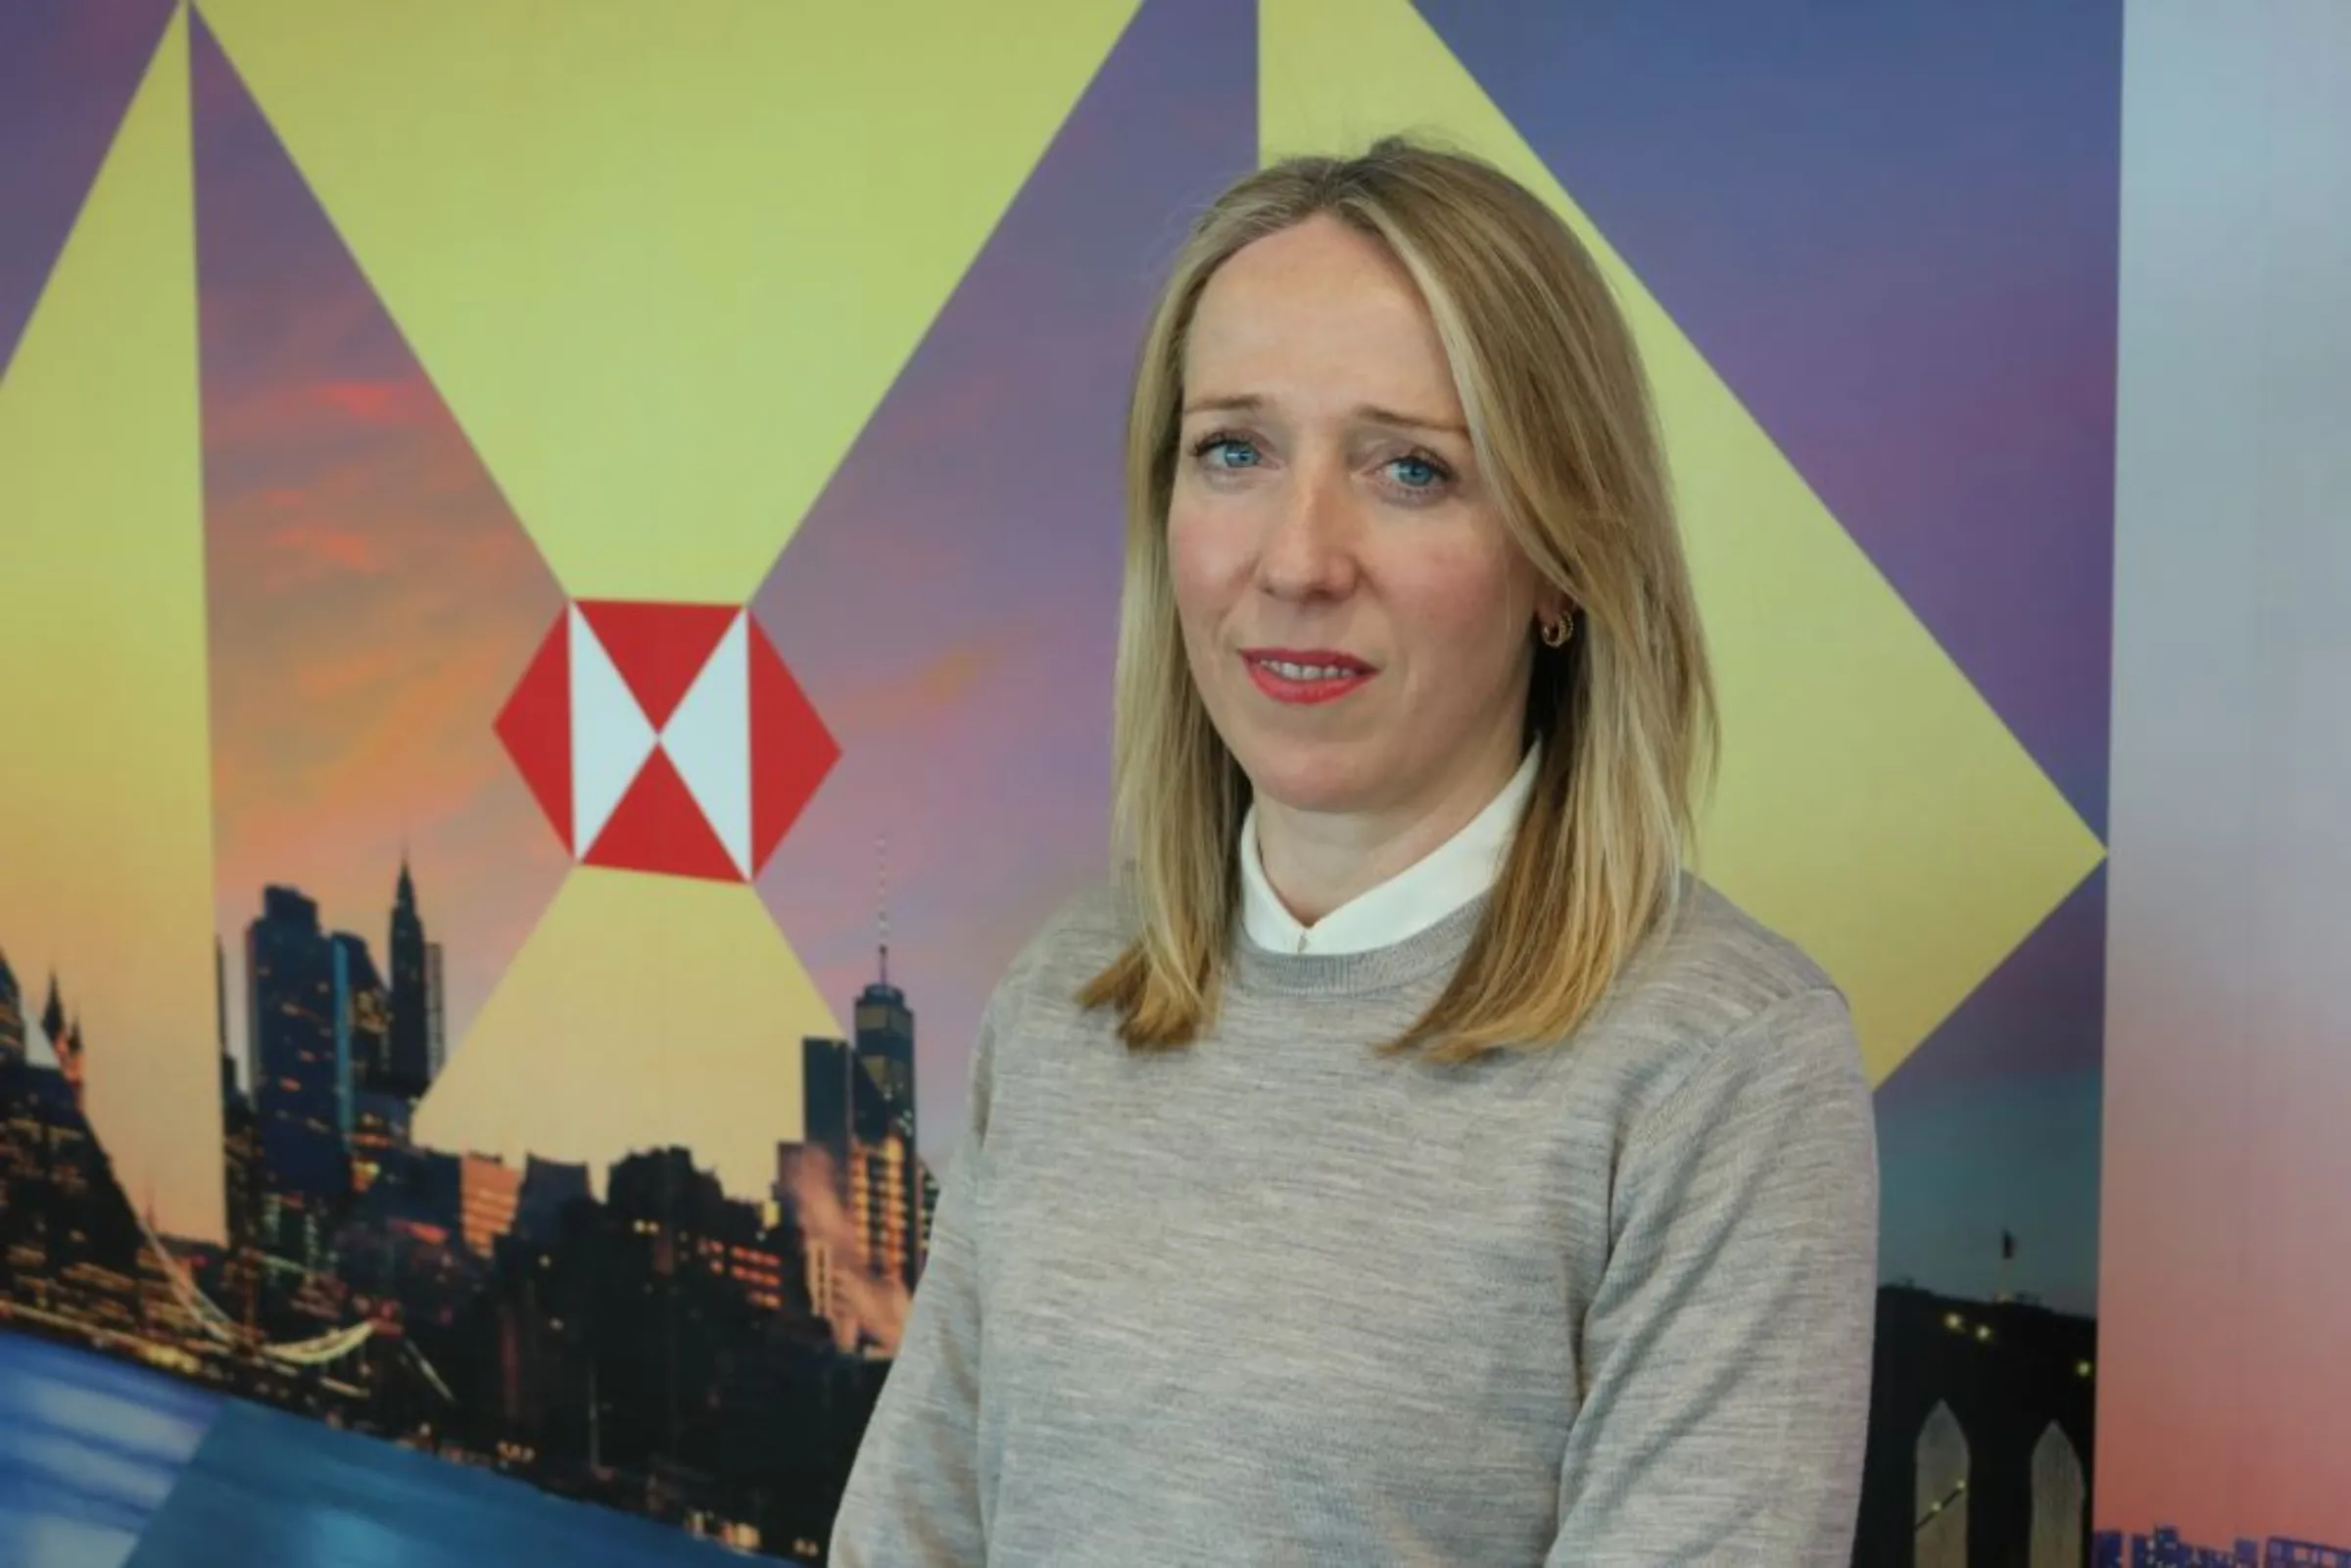 Sustainability expert and former civil servant Jenny McInnes at HSBC's headquarters in London, United Kingdom, April 26, 2023